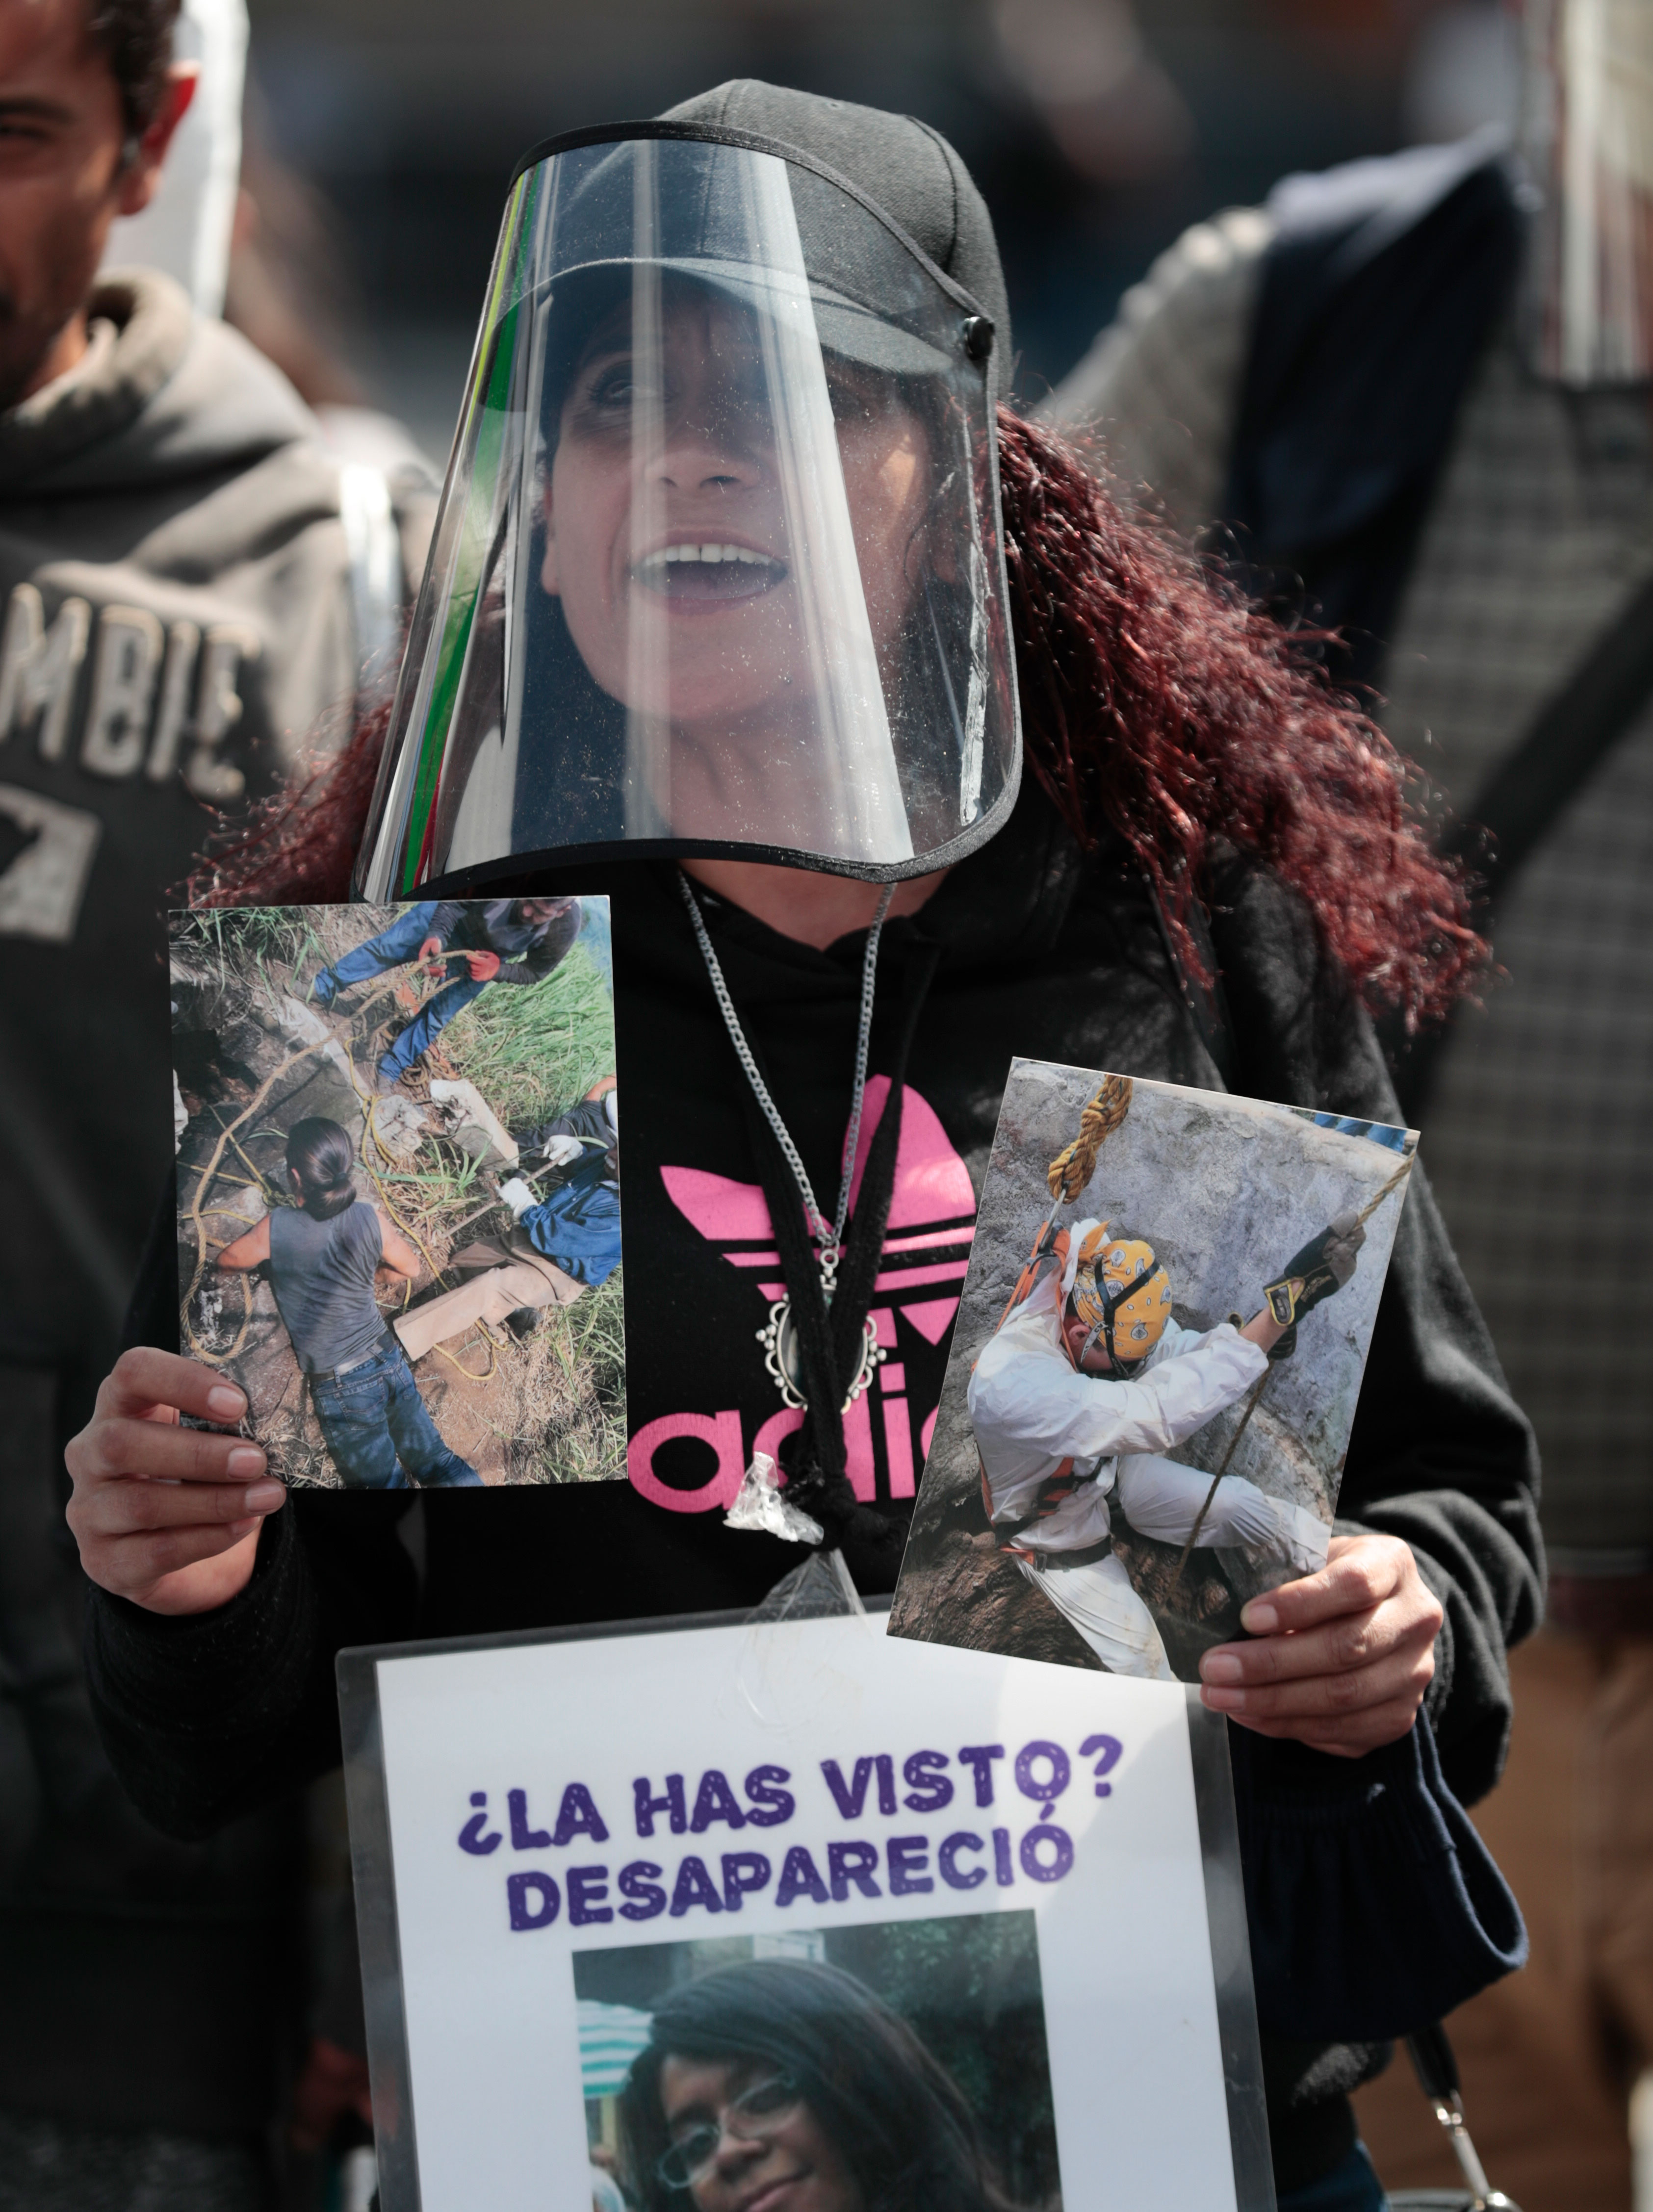 
A woman wearing a mask amid the coronavirus pandemic holds an image of a person who was disappeared, during a protest in front of the National Palace in Mexico City [Eduardo Verdugo/AP Photo]
